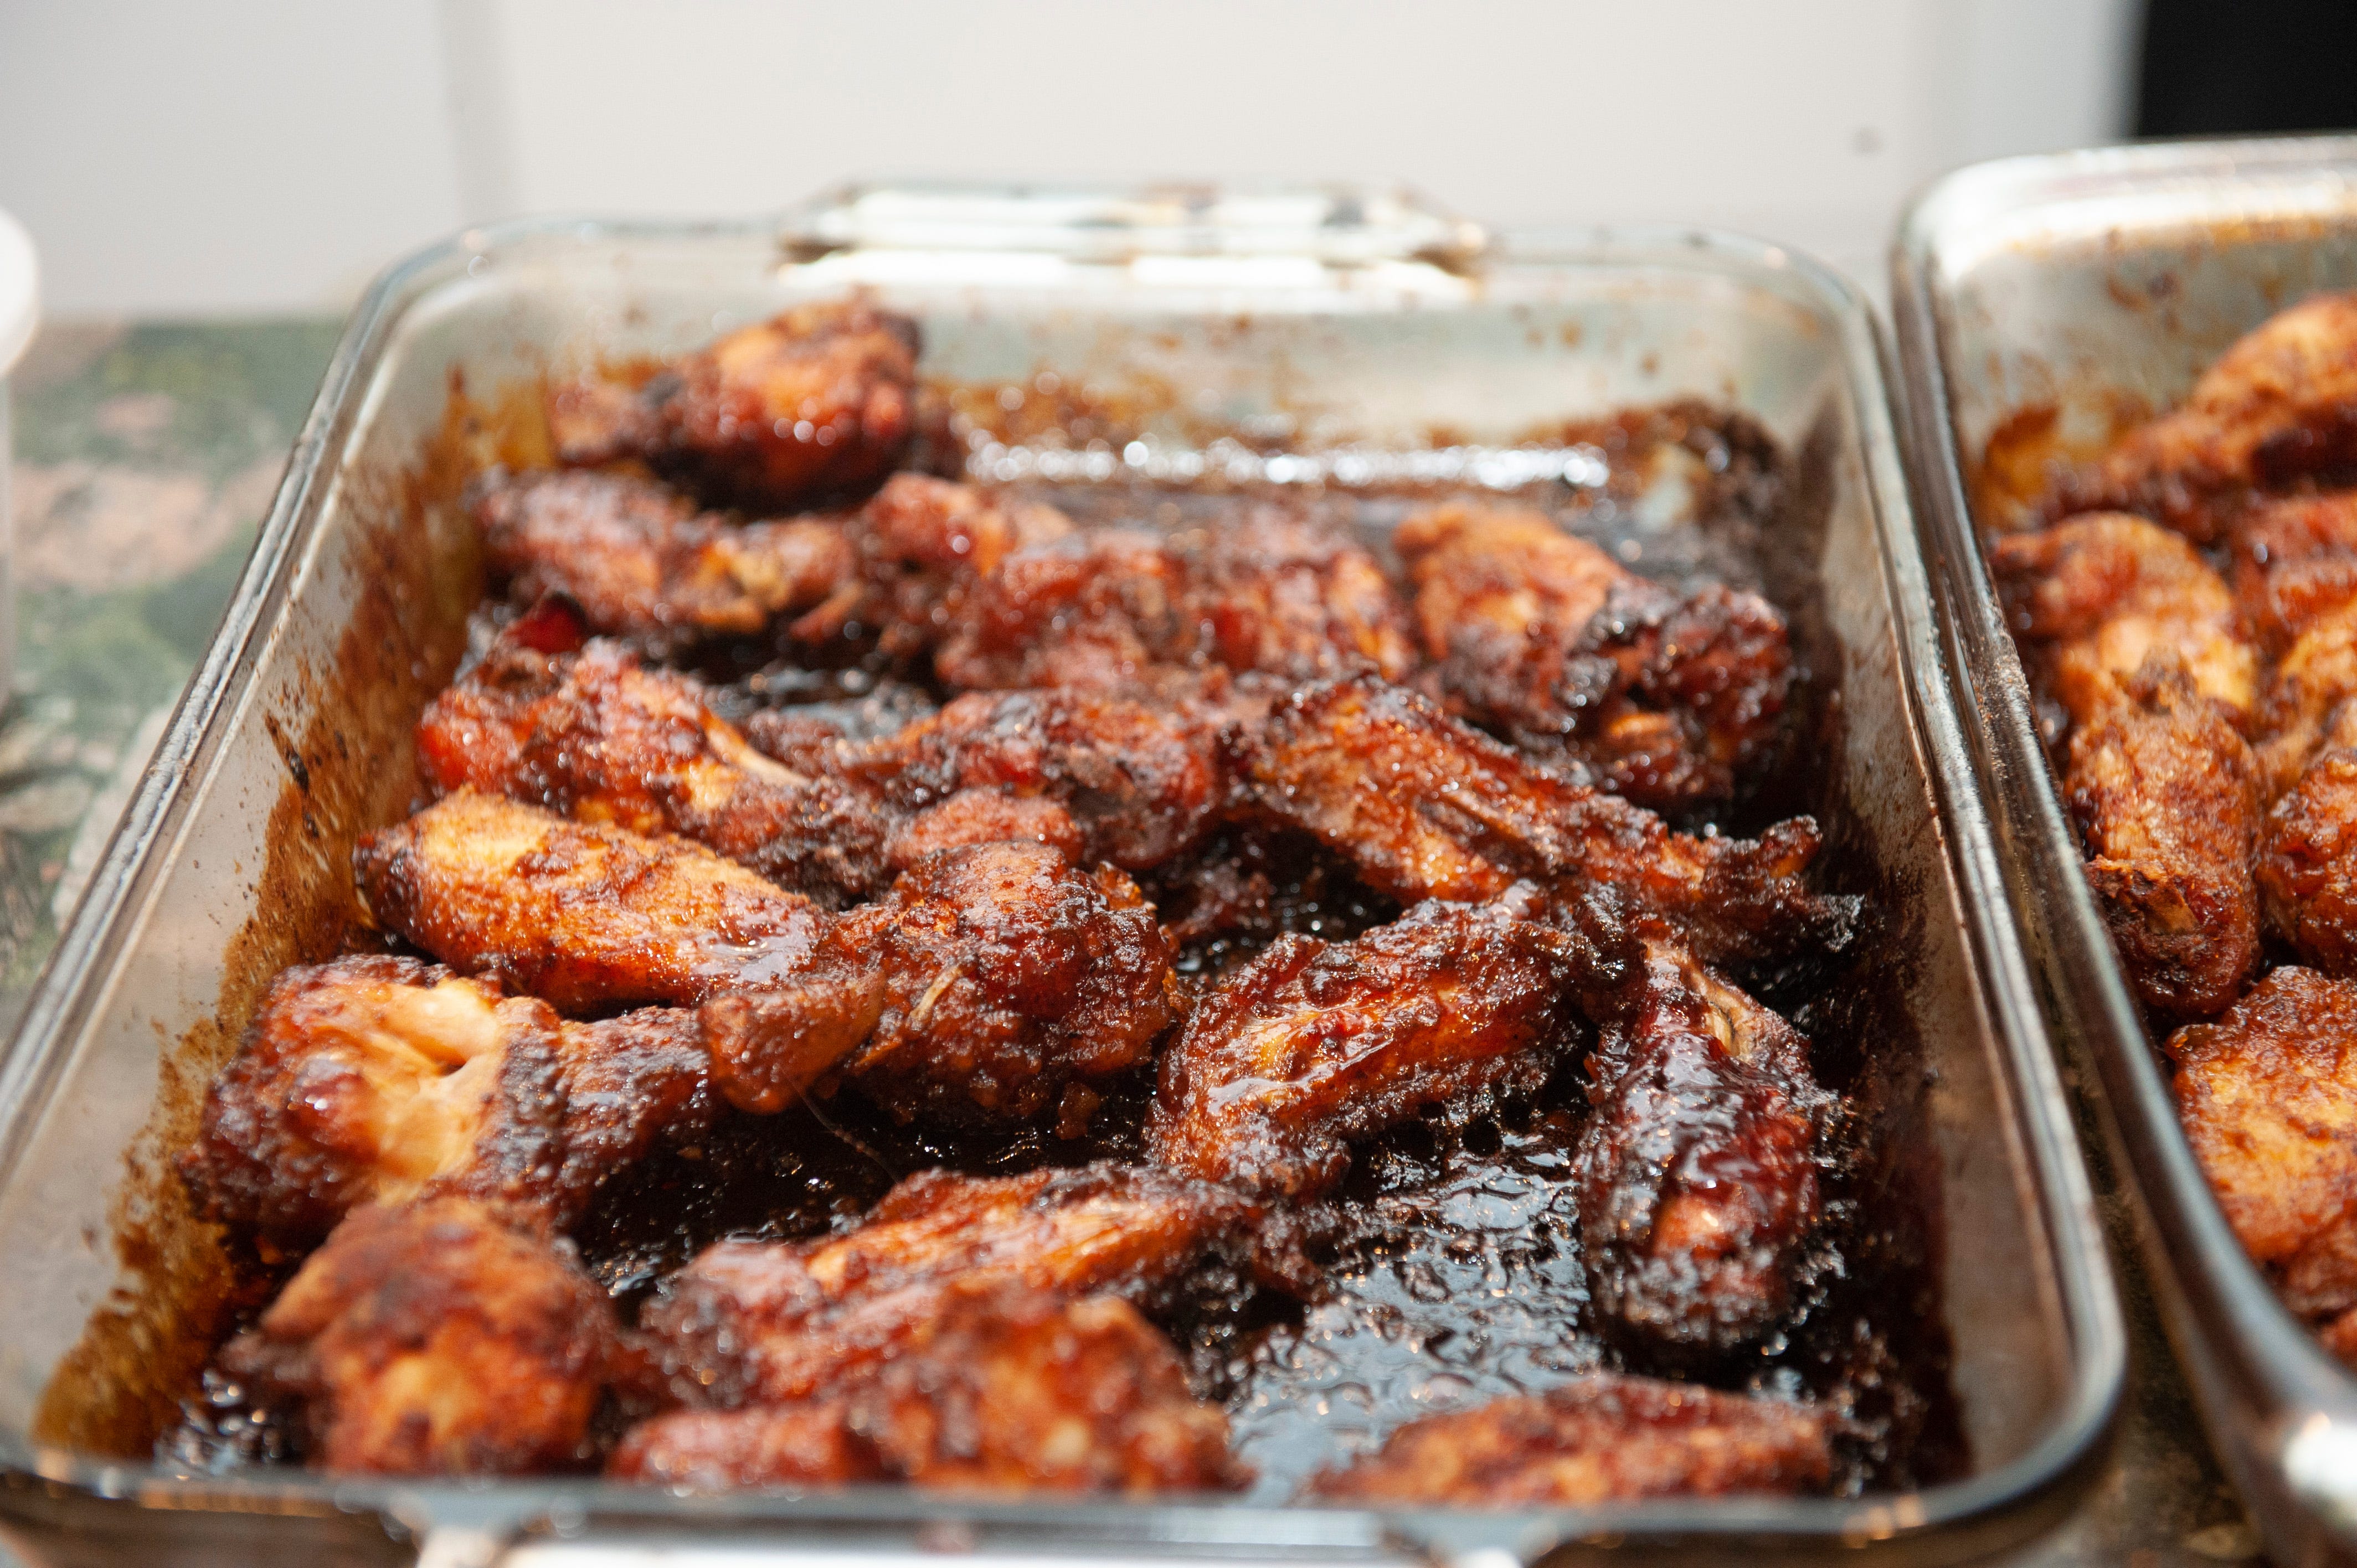 Cannabis-infused Kush Cola chicken wings by Cannabis Concepts chef Gigi Diaz arrive hot out of the oven for party guests to sample during "The Art of Cannabis" tasting and art exhibition.